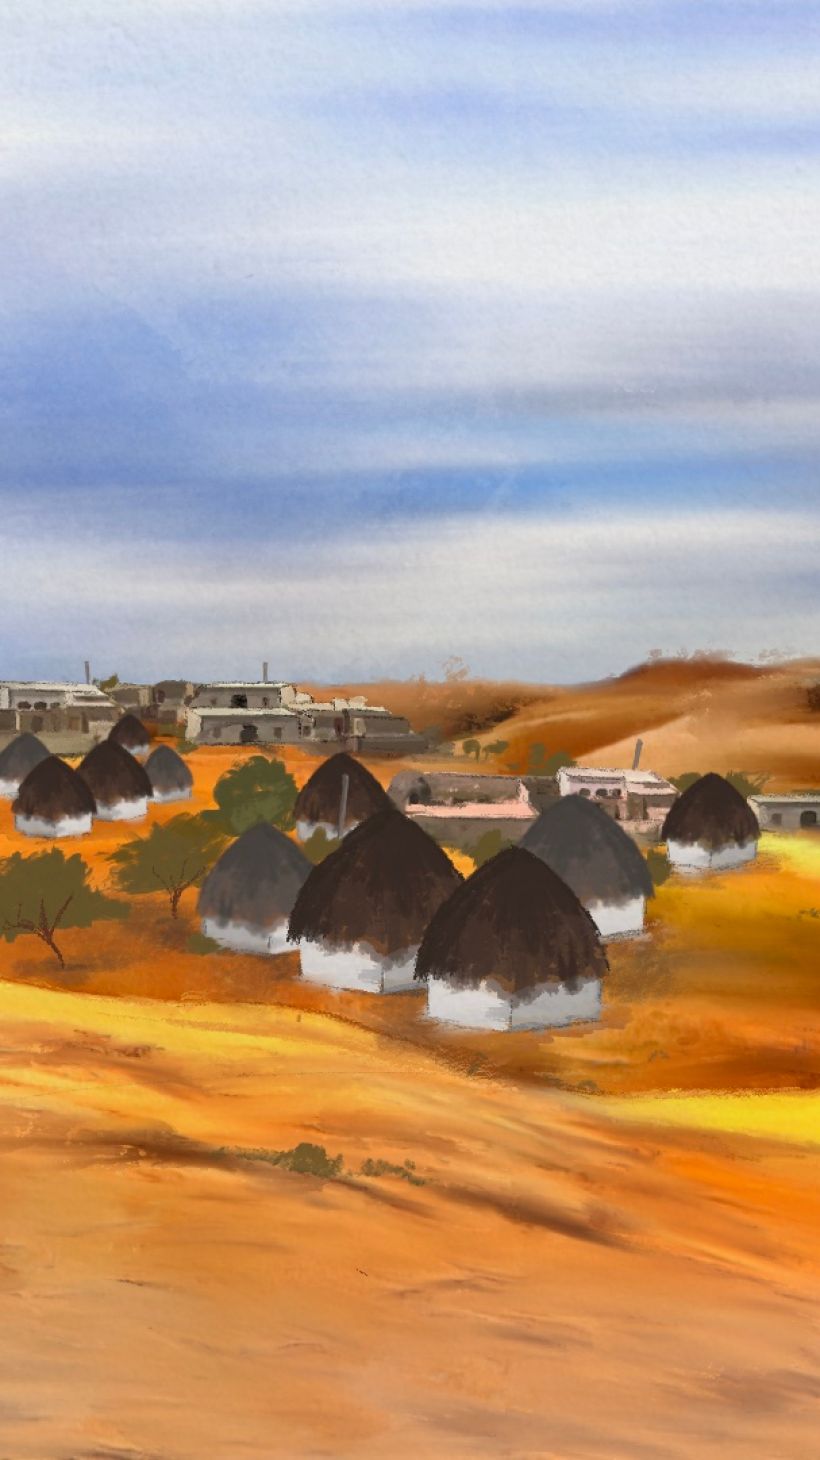 An illustration of huts and houses and camels in the distance in the dessert.